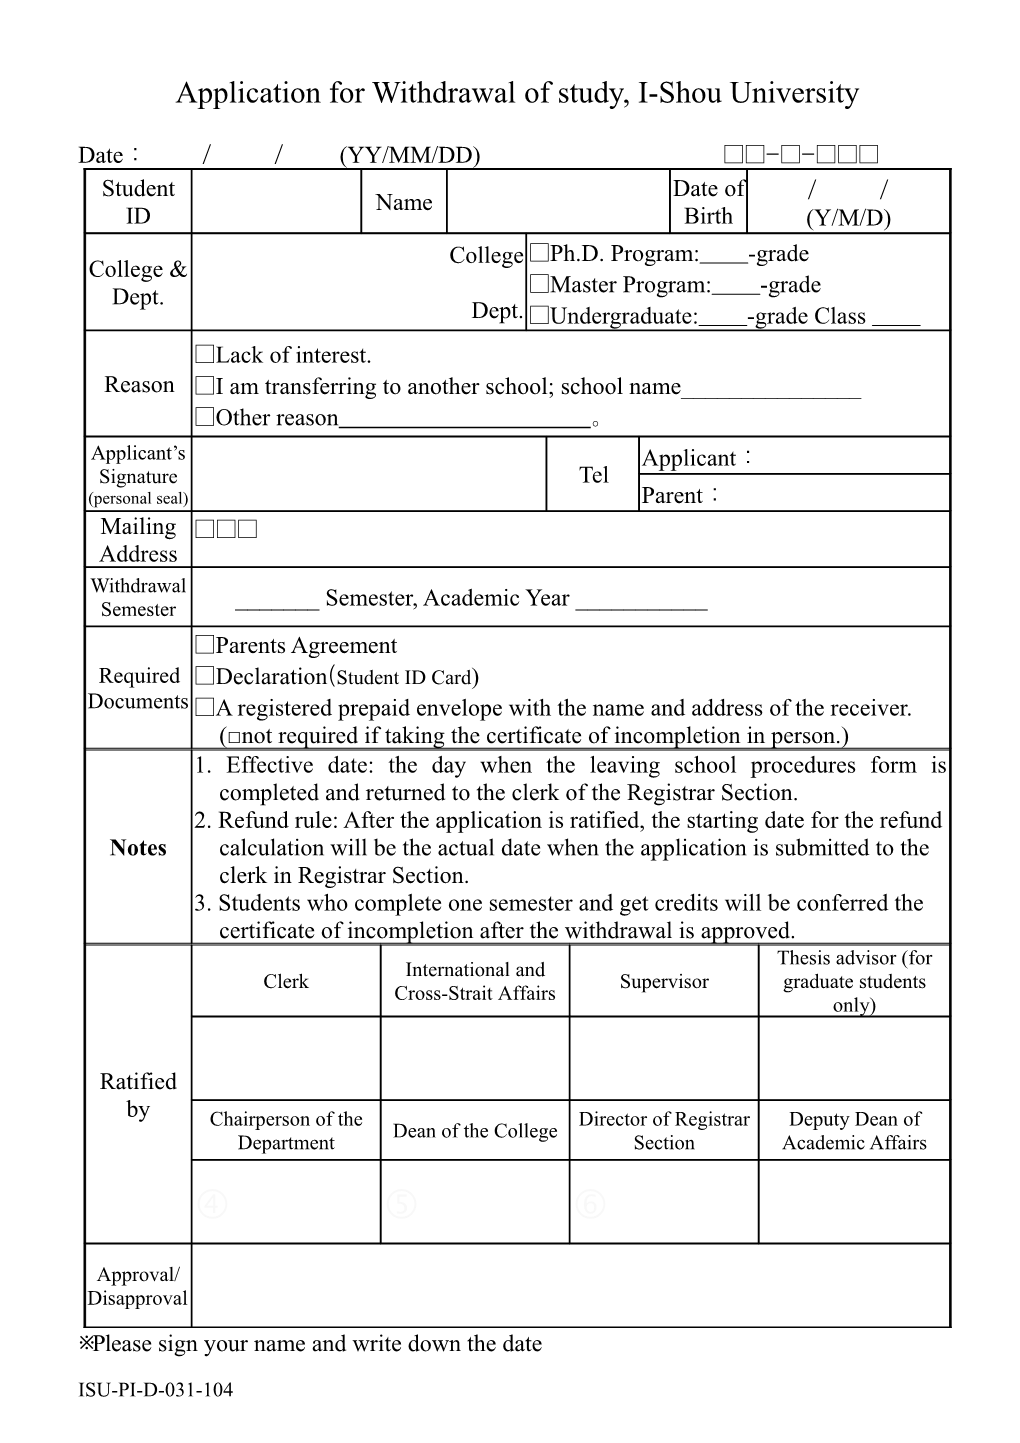 Application for Withdrawal of Study, I-Shouuniversity